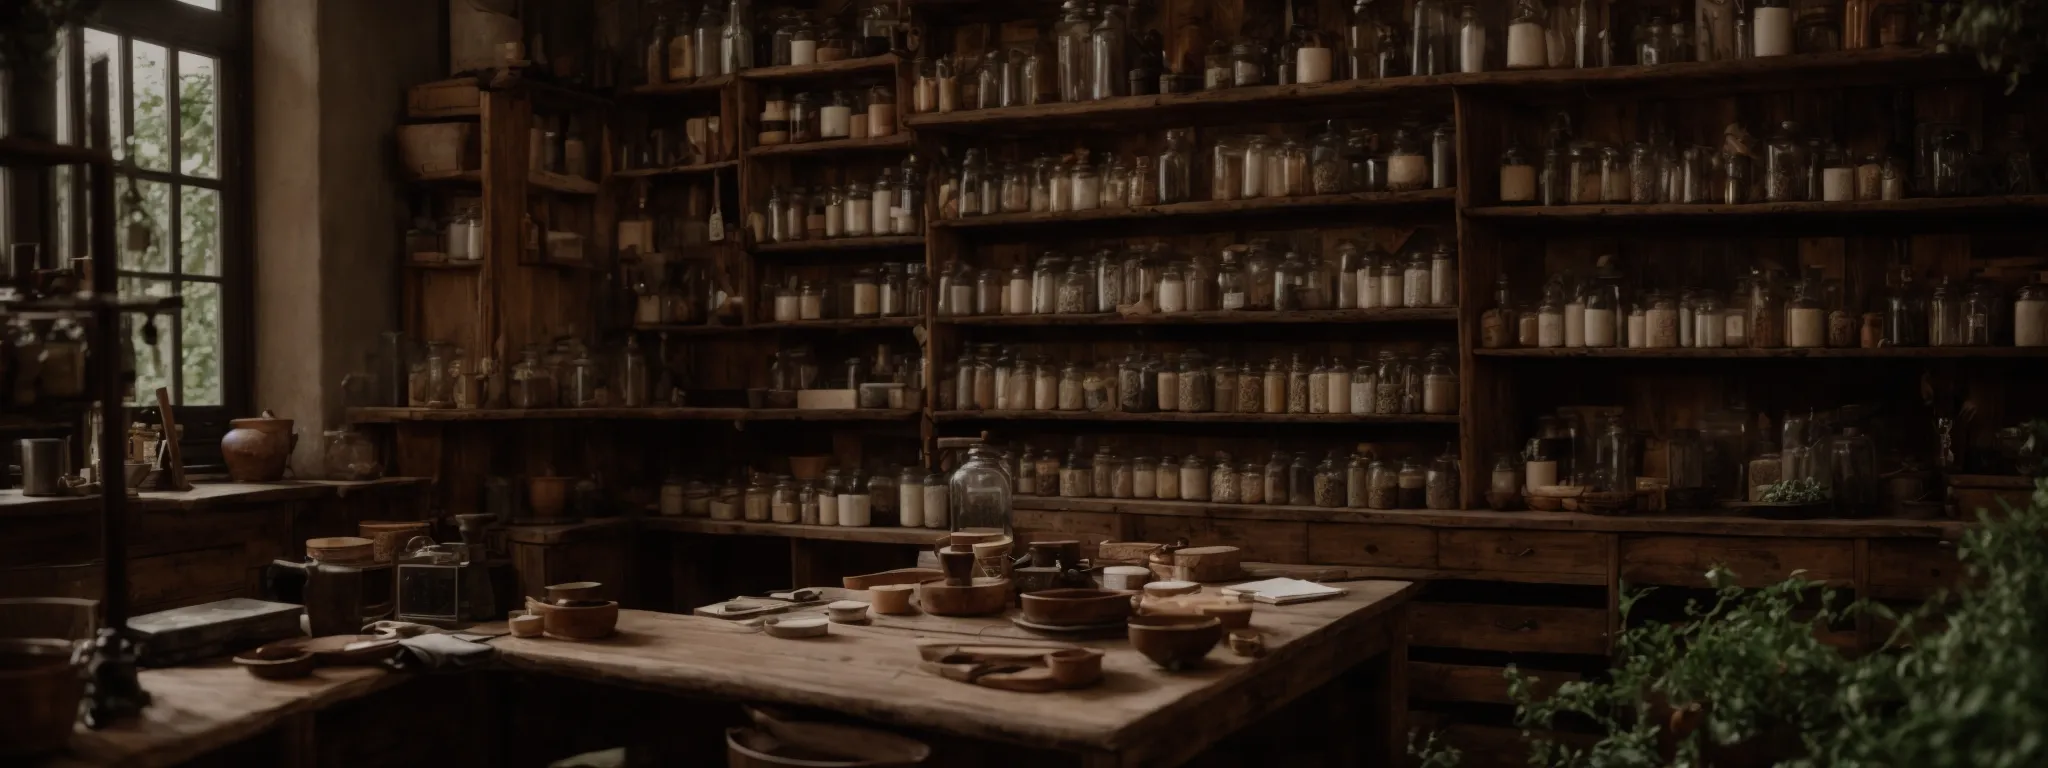 a herbalist's workshop with shelves of bottled herbs and a desk with an open book and glasses.